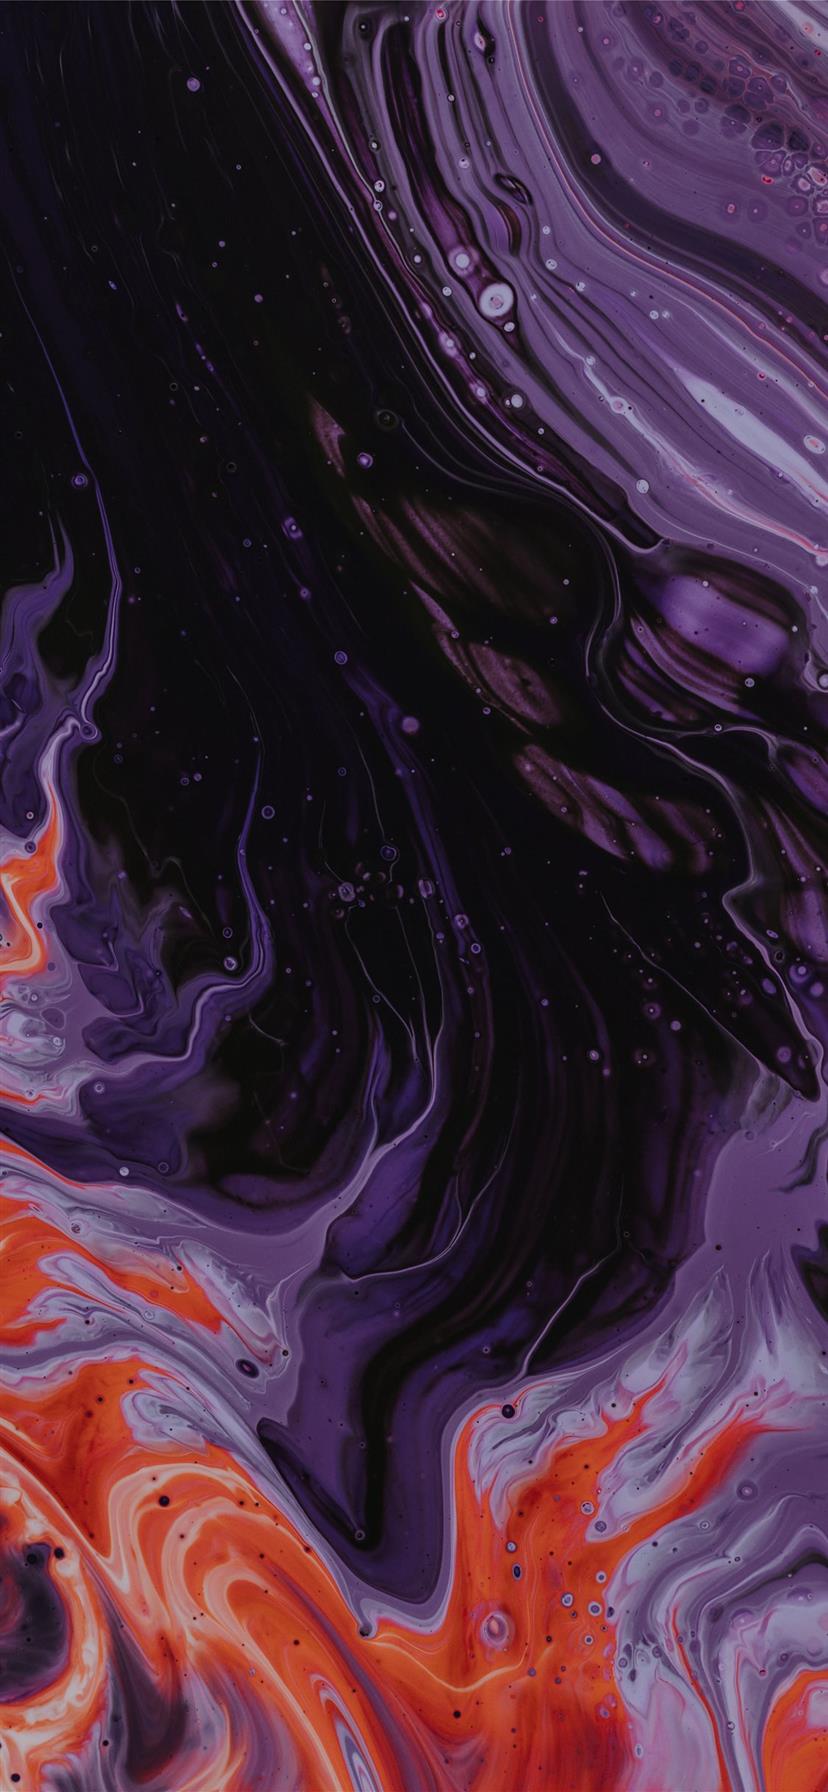 purple black and orange abstract paintin iPhone X Wallpaper Free Download